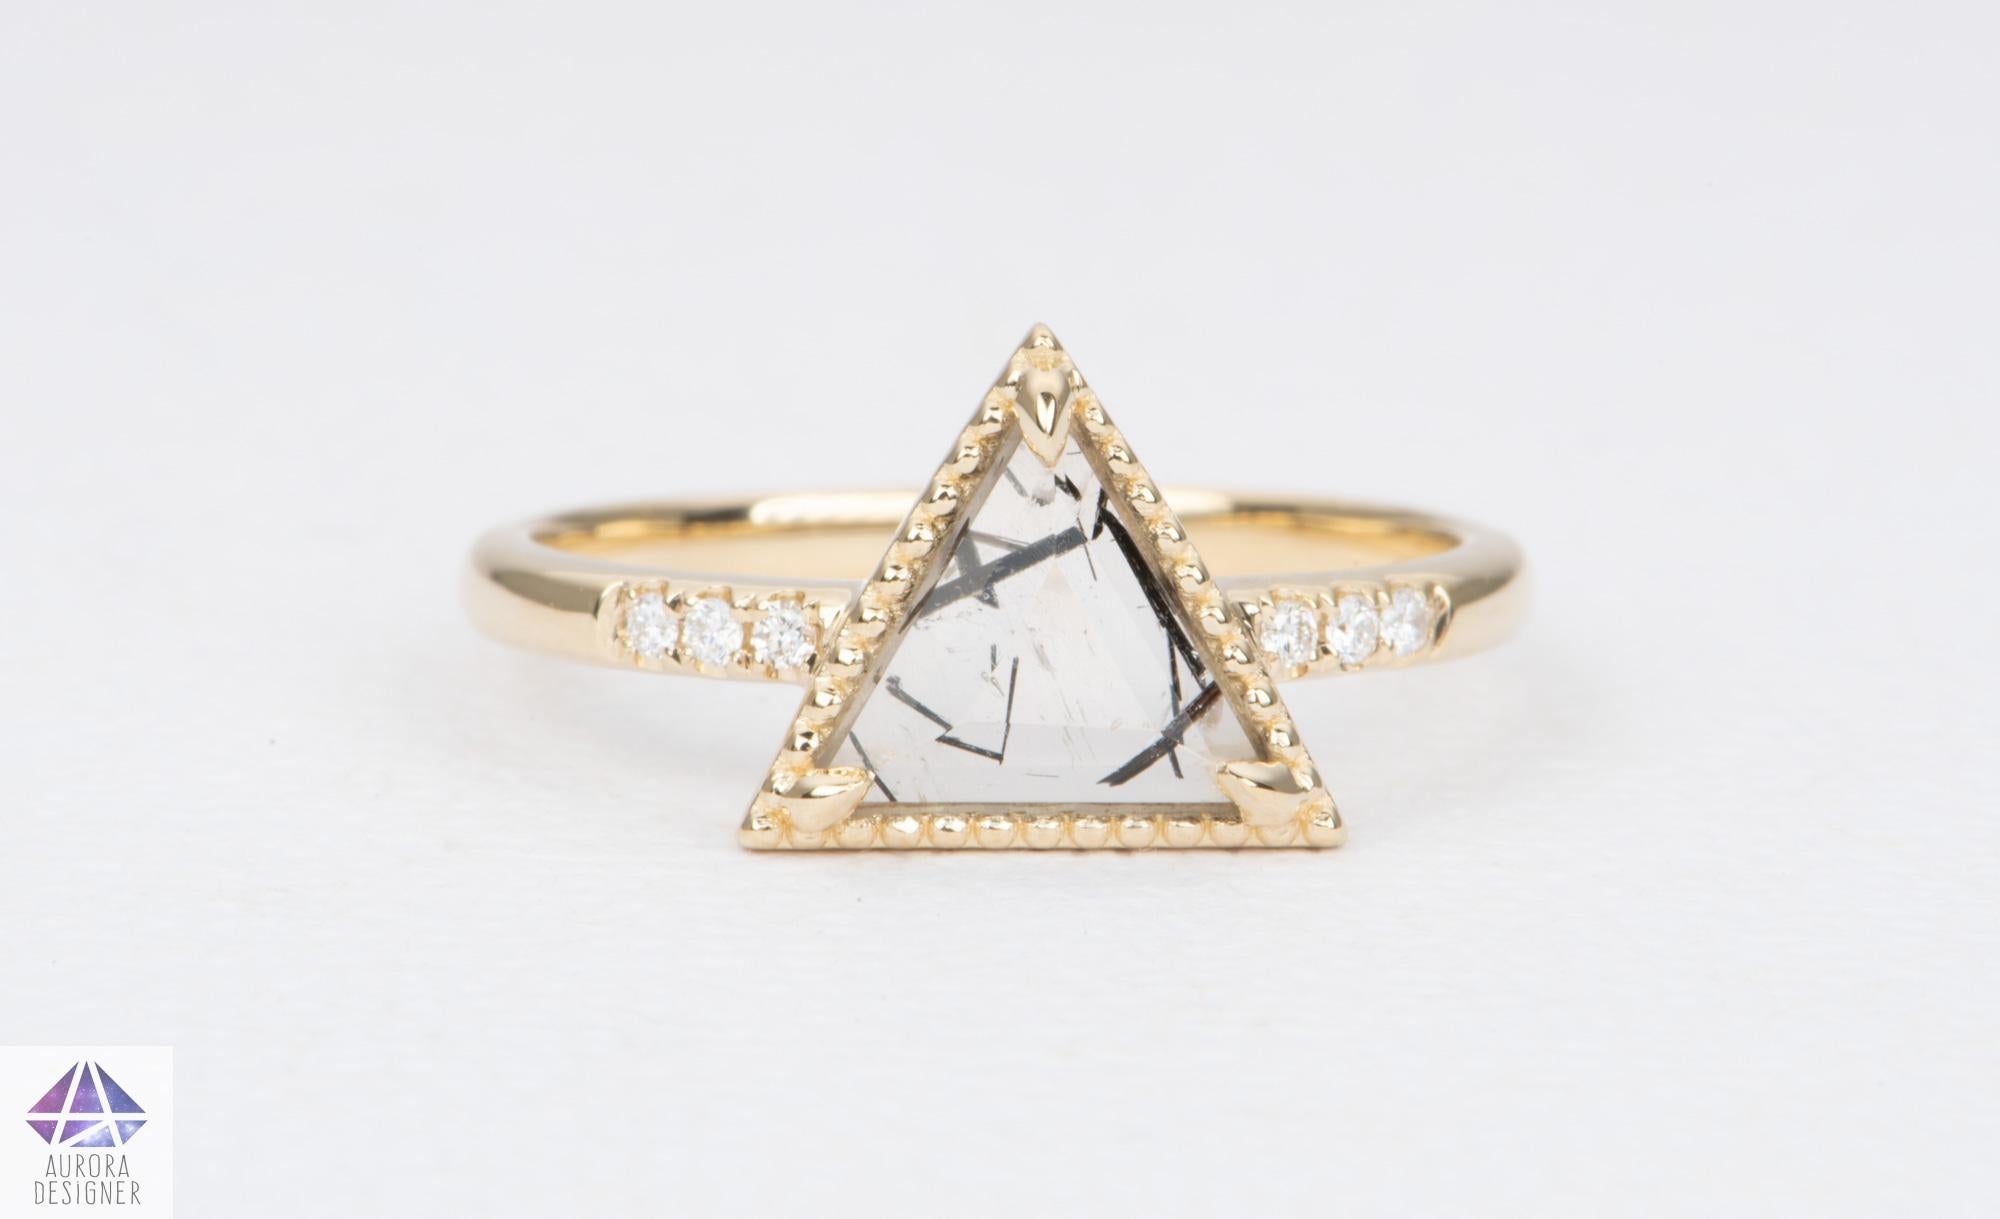 ♥ Geometrical tourmalated quartz stone with naturally occurring black striations sits centered between three pave diamonds on each side.
♥ Three modern claw prongs secure the triangular stone, which is surrounded by an ornate milgrain edge.

♥  US